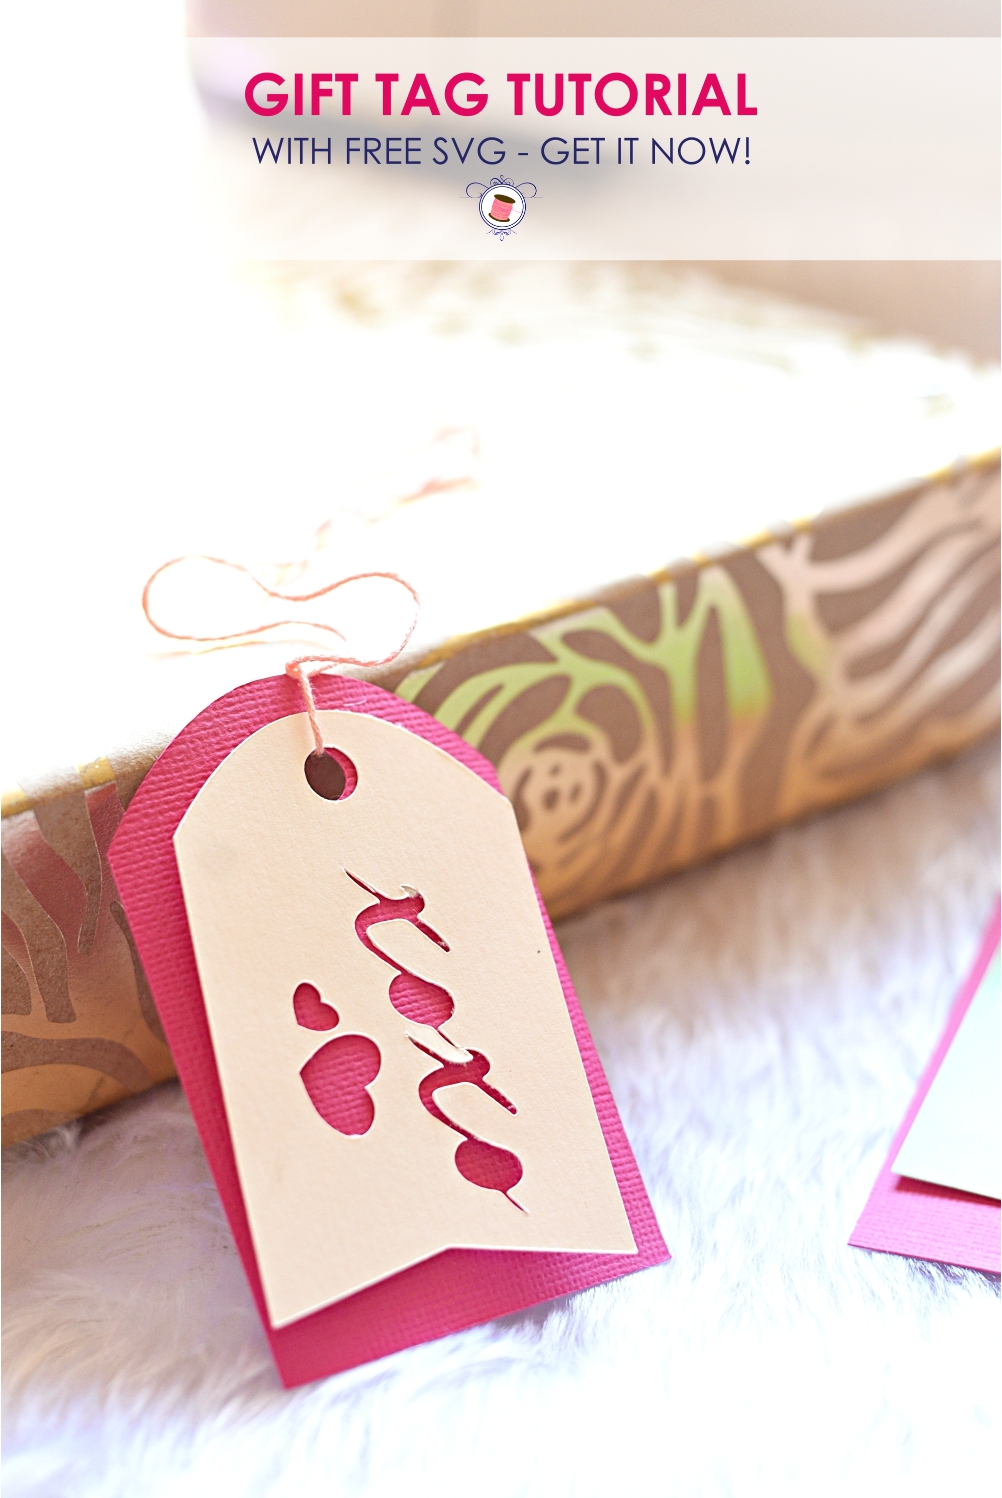 Super Cute Free SVG Gift Tags for Cricut - Sew Some Stuff